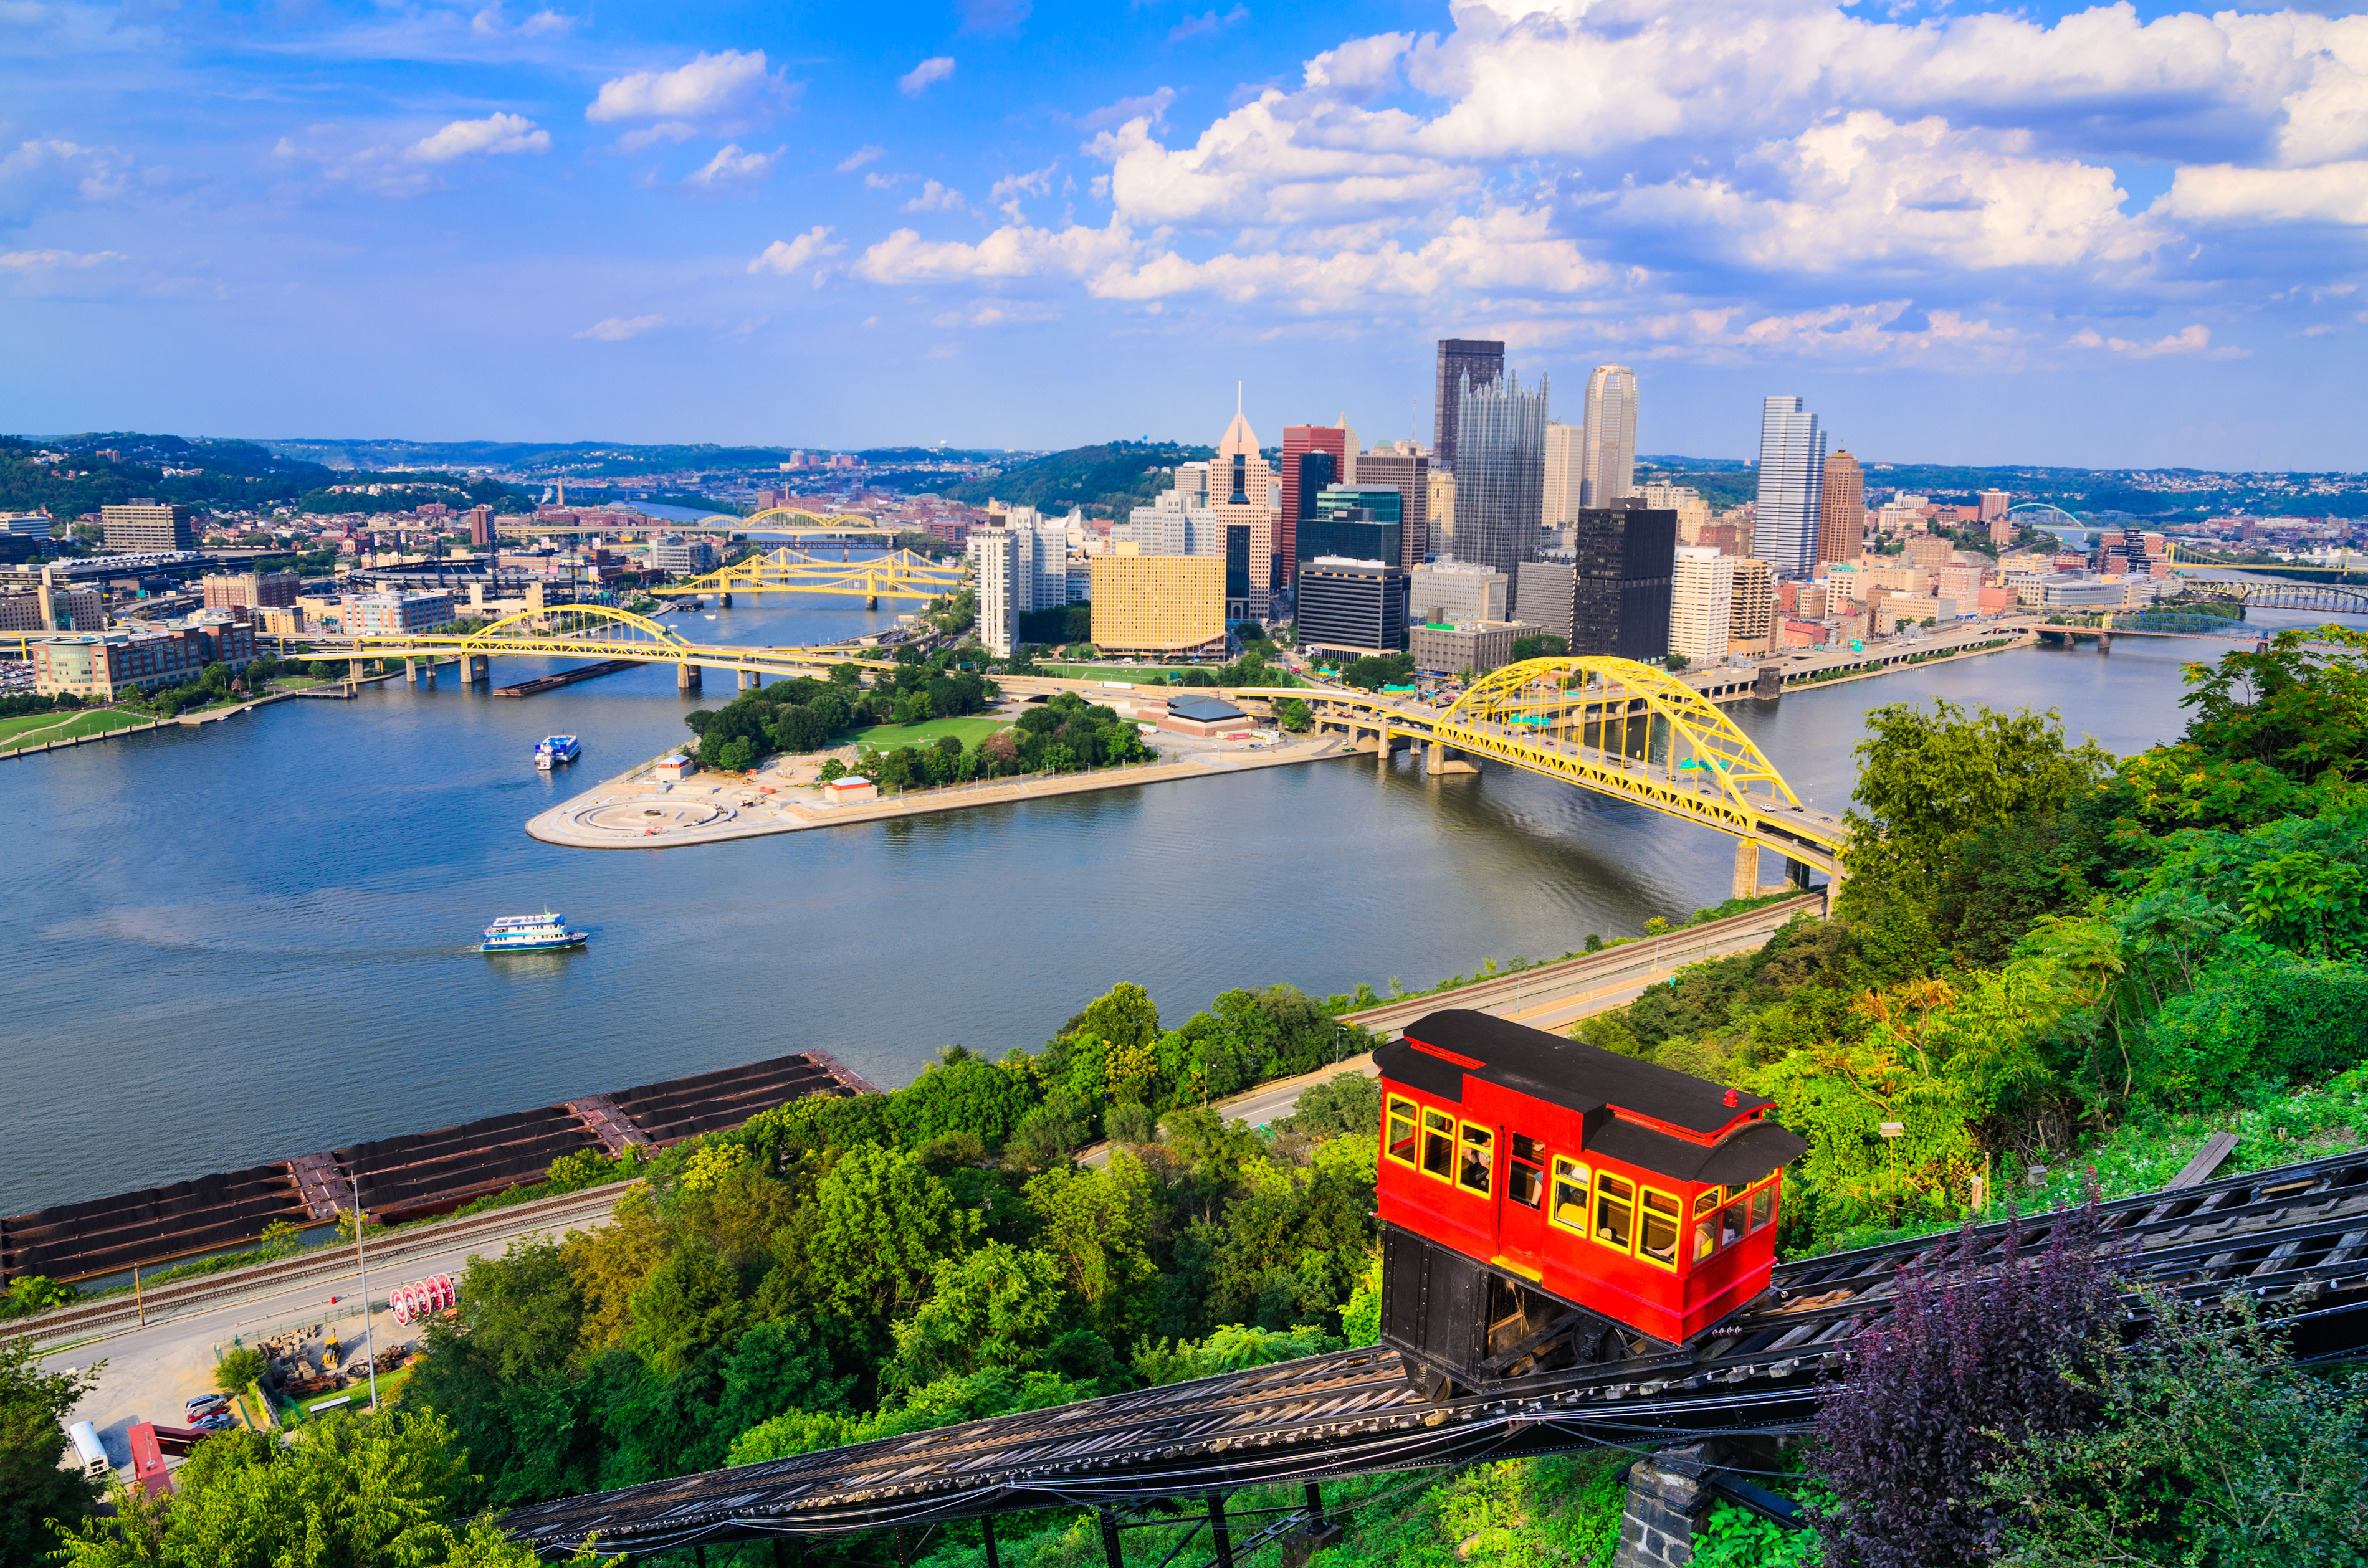 Use Driven Rewards points to explore Pittsburgh, a city served by Trailways bus service and charter bus rentals